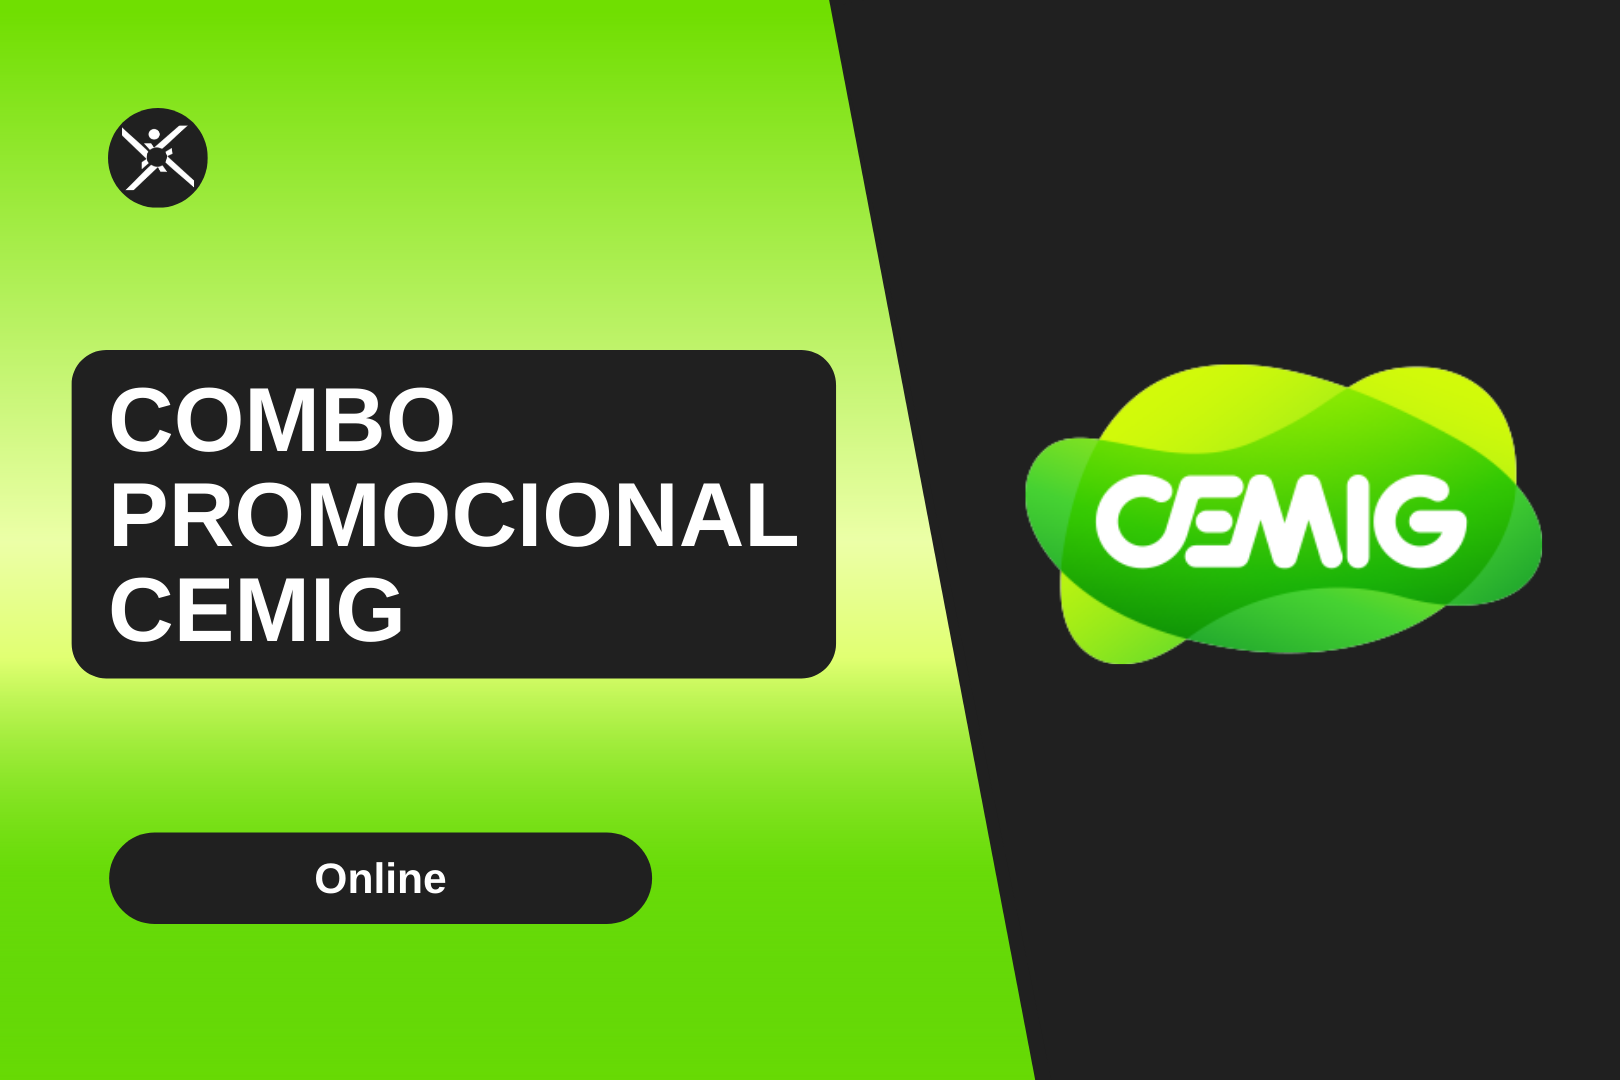 COMBO PROMOCIONAL CEMIG